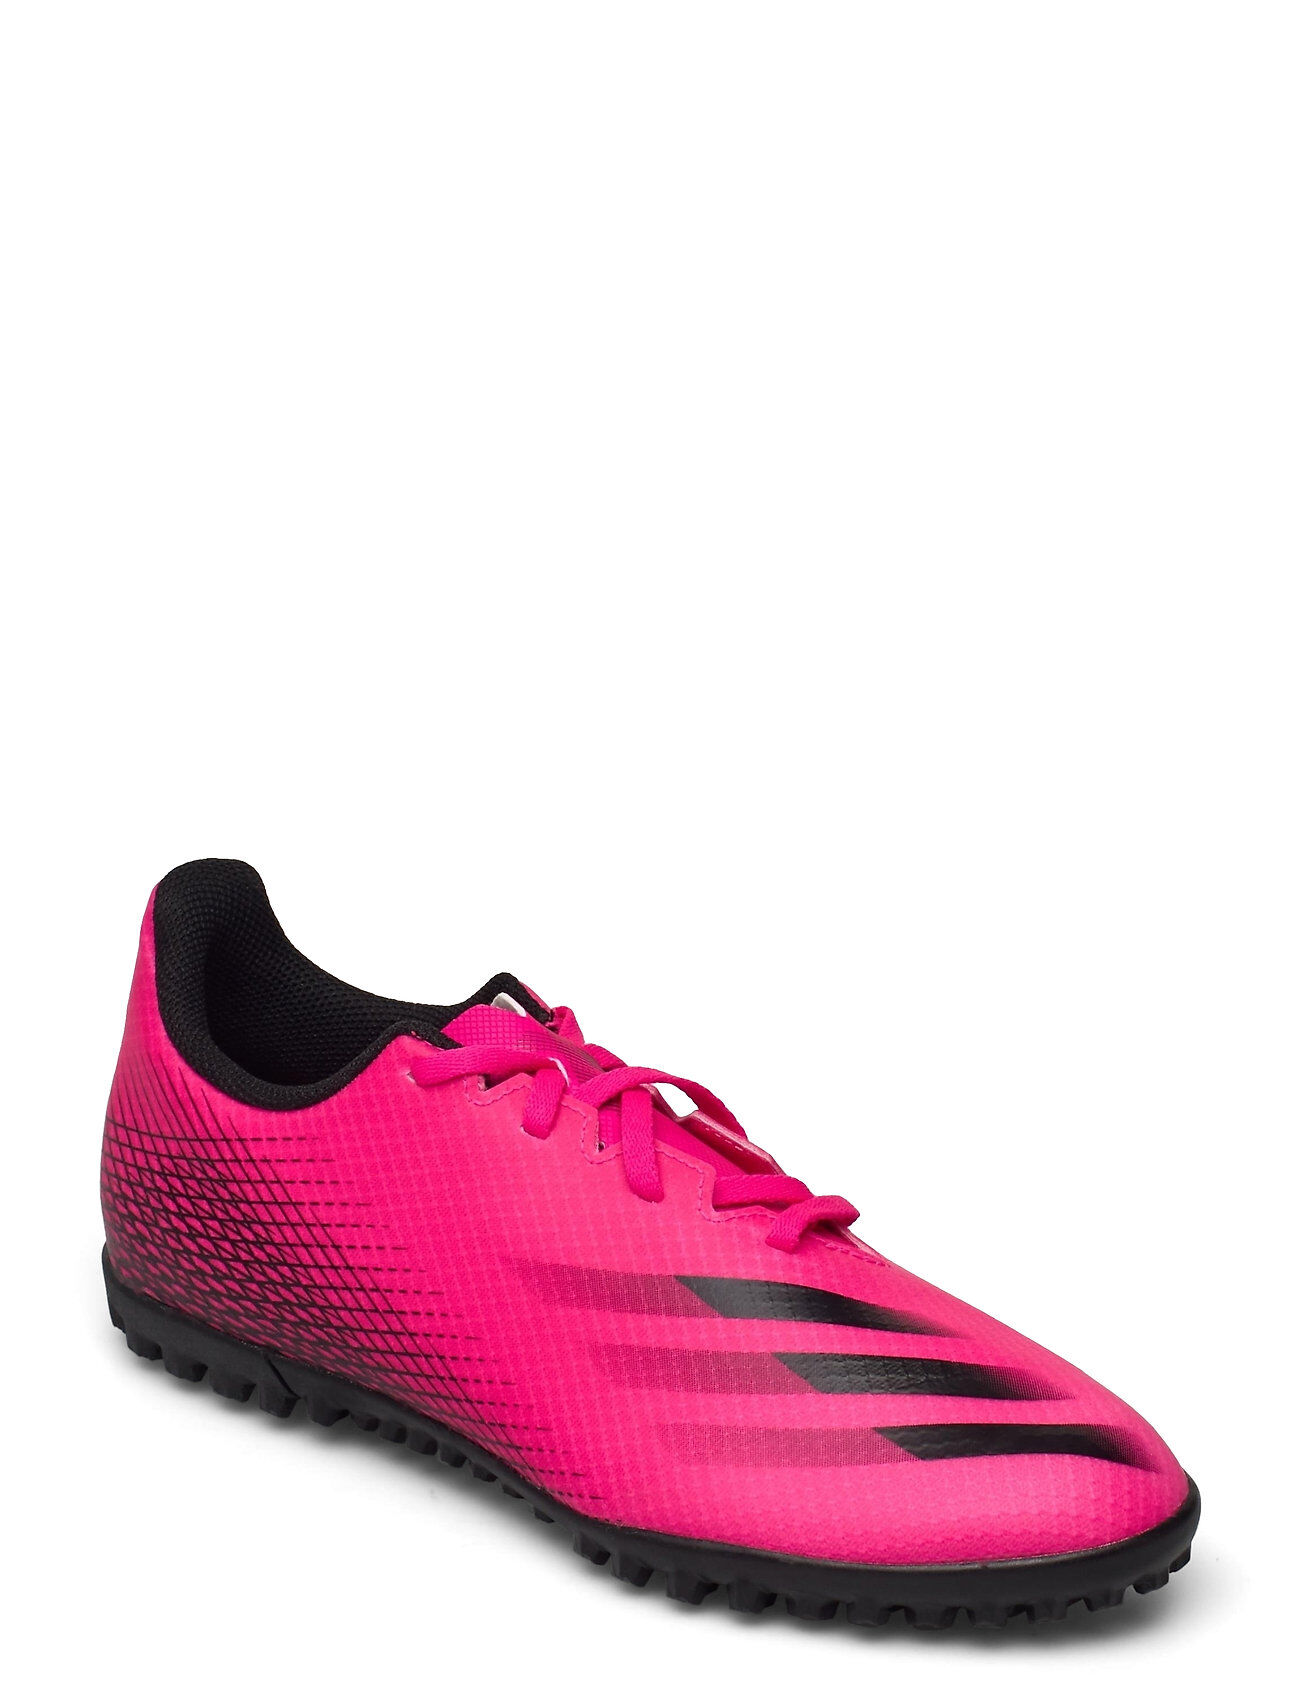 adidas Performance X Ghosted.4 Turf Boots Shoes Sport Shoes Football Boots Rød Adidas Performance